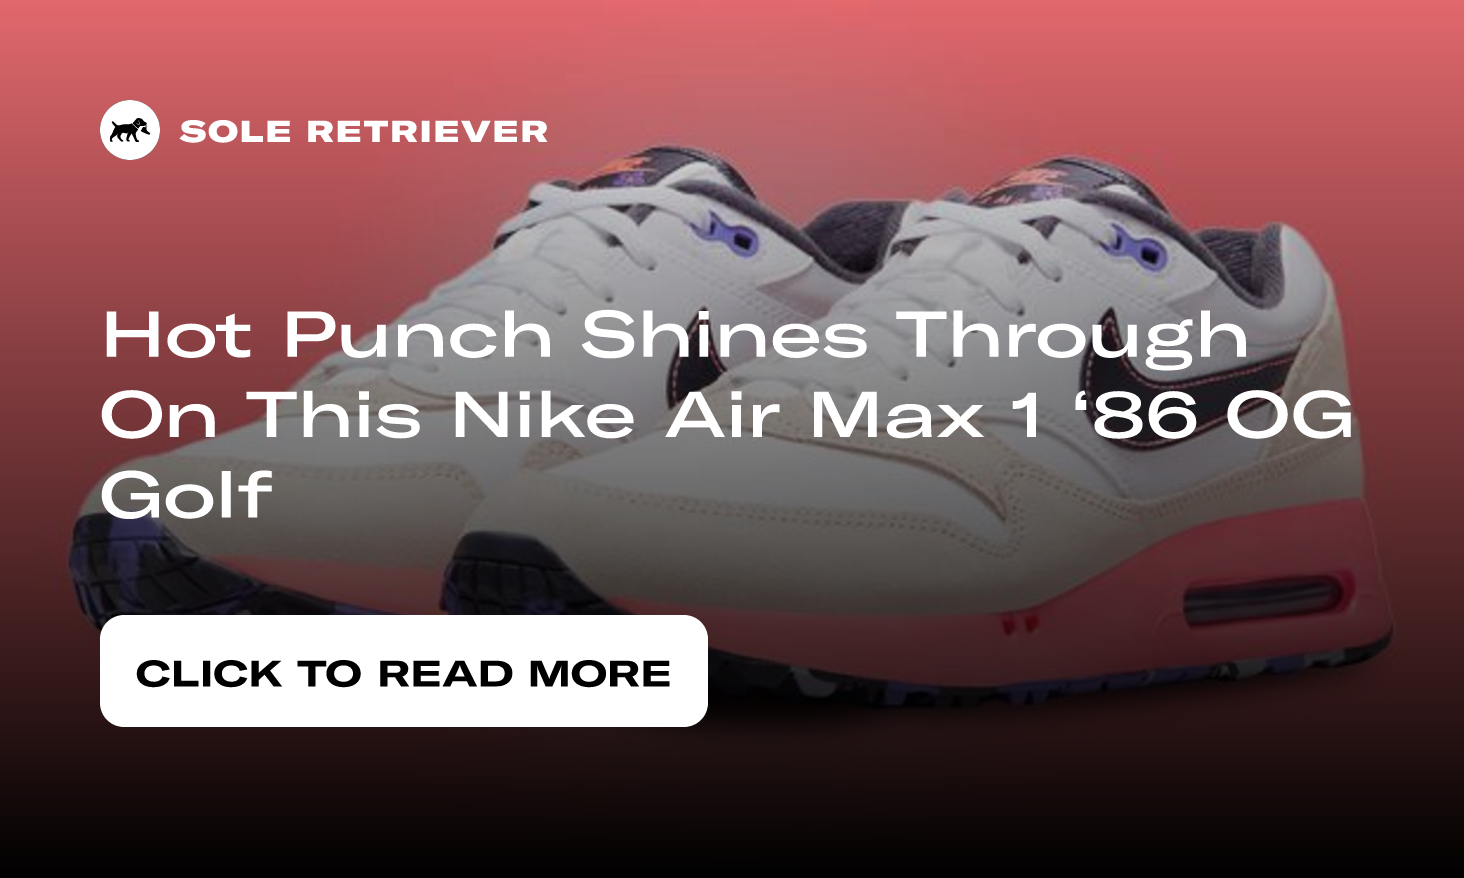 Hot Punch Shines Through On This Nike Air Max 1 '86 OG Golf